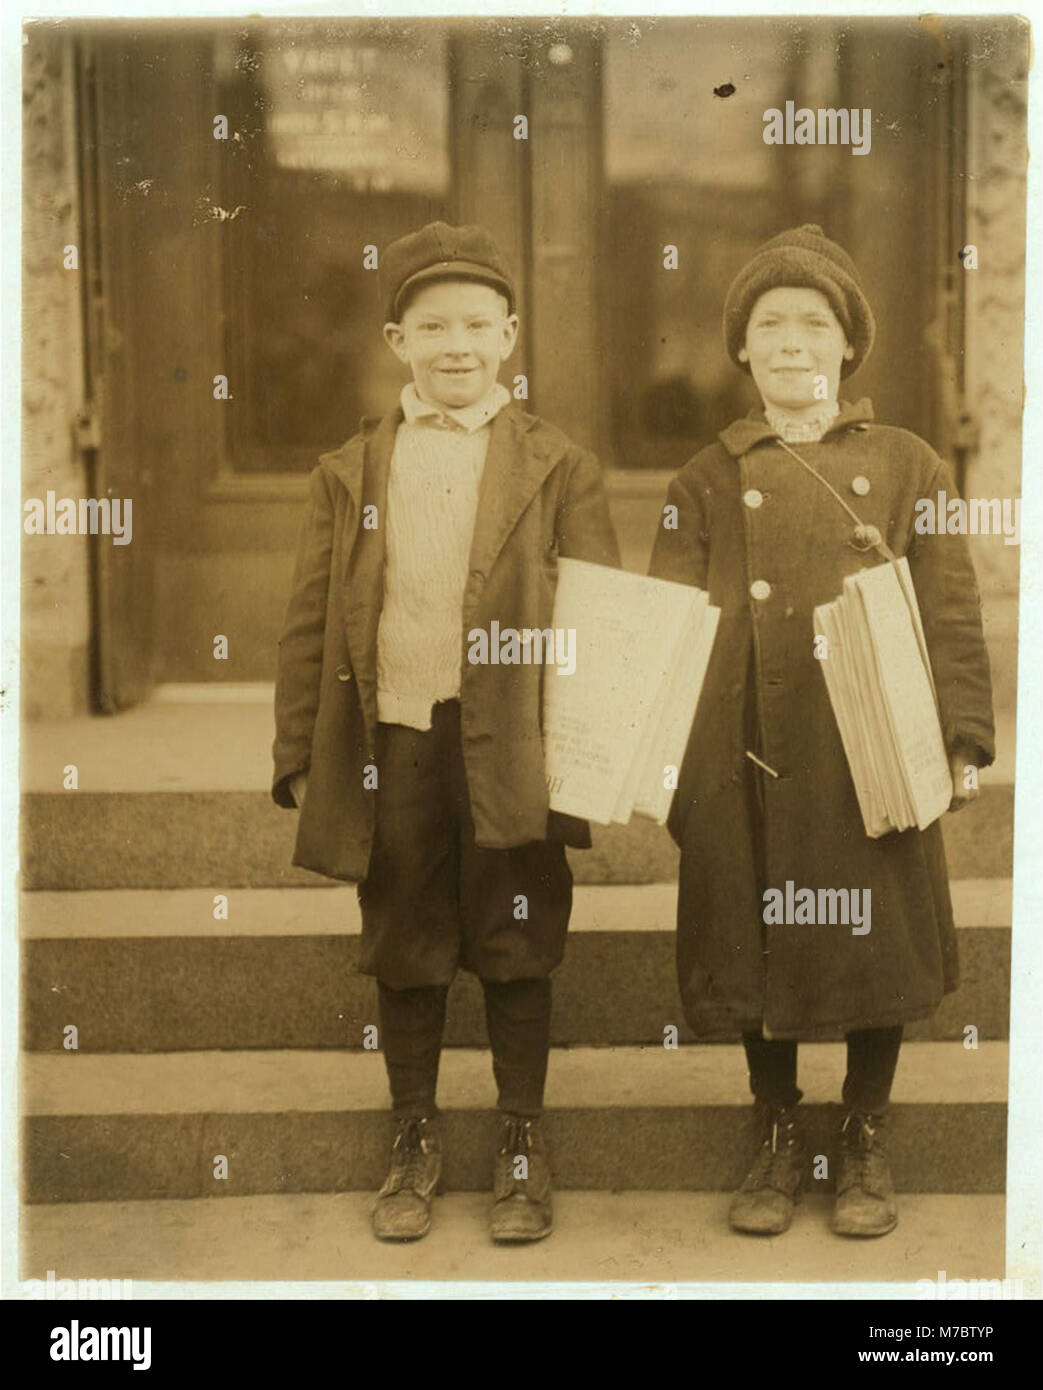 3 P.M. Teddy and Lester (on right) - both 9 yrs. old - and sell until 8 P.M. LOC nclc.03818 Stock Photo